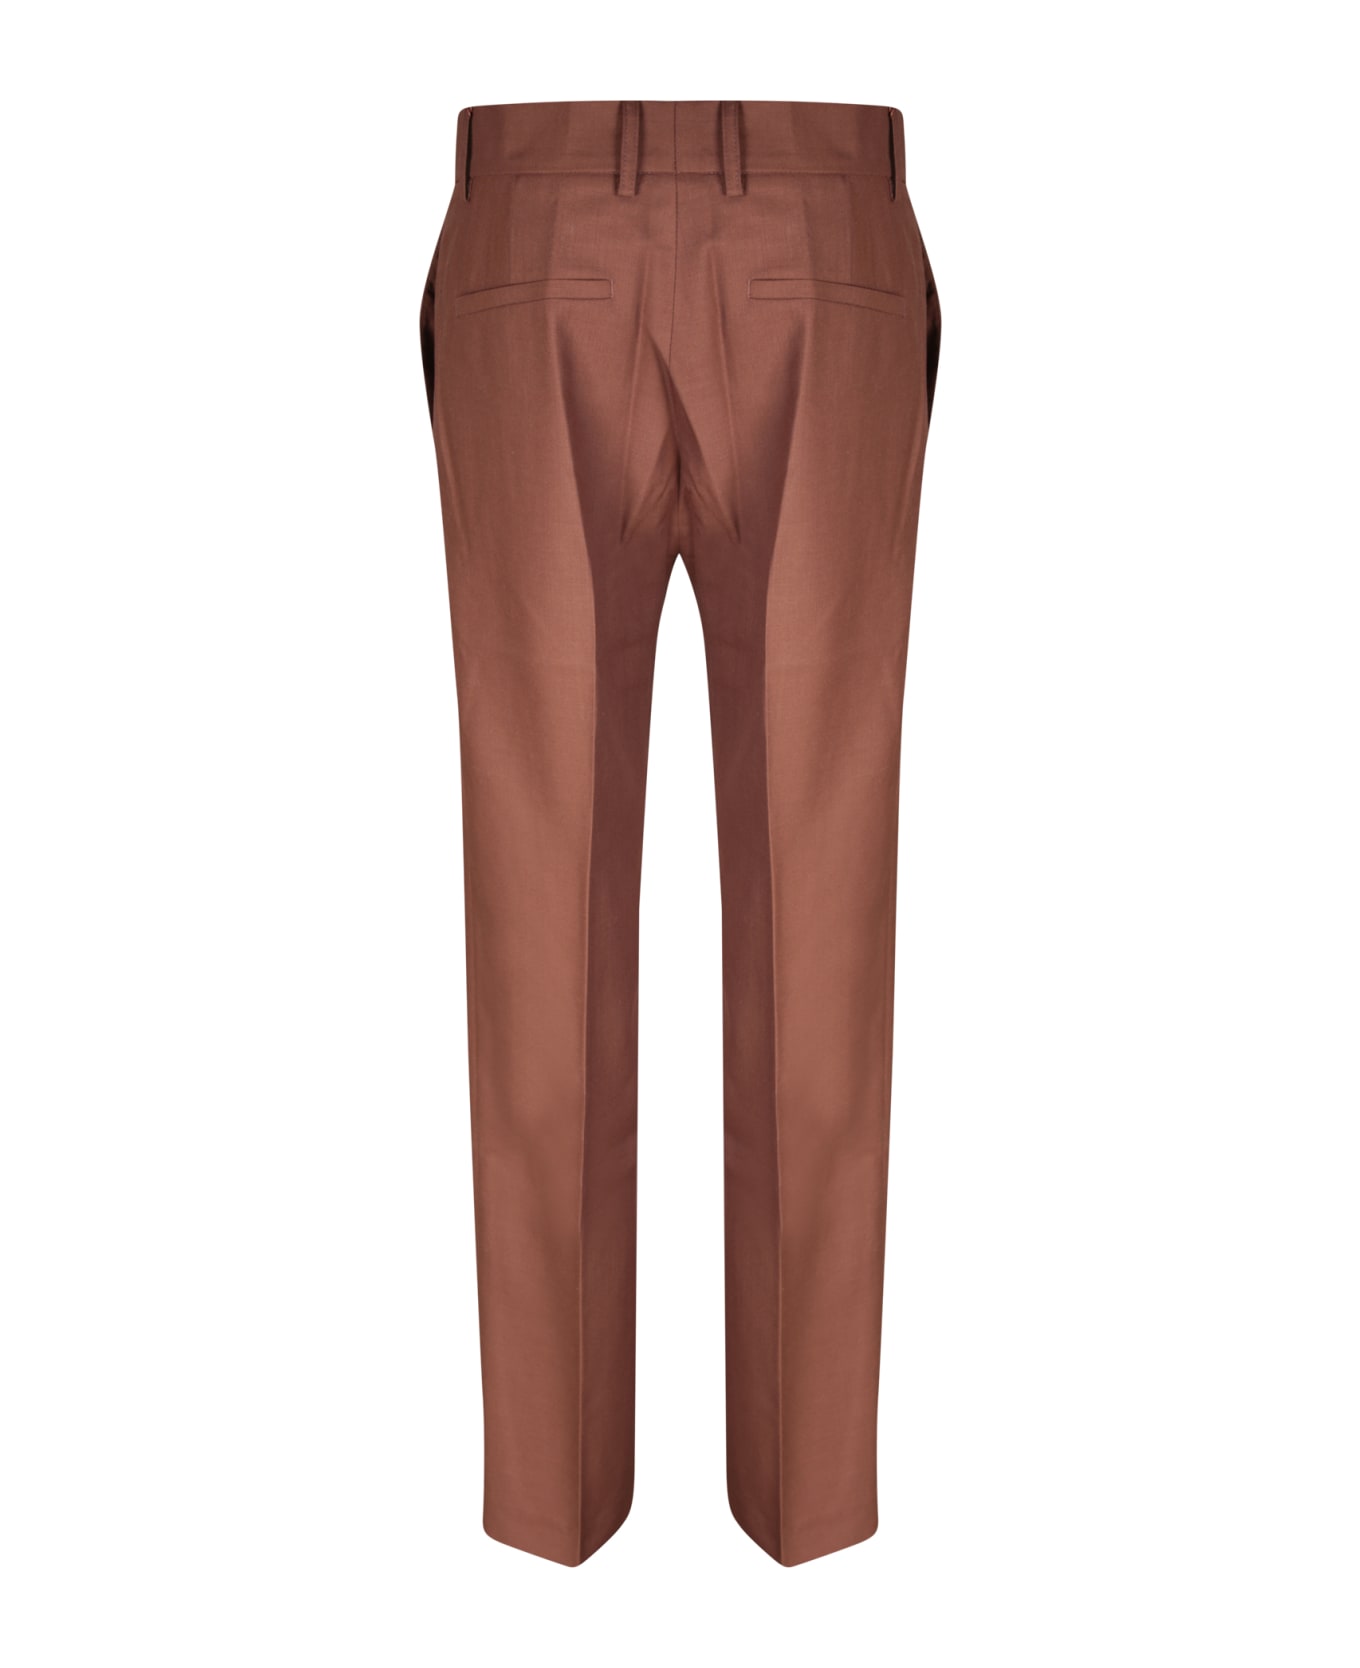 Séfr Mike Suit Trousers In Brown - Brown ボトムス